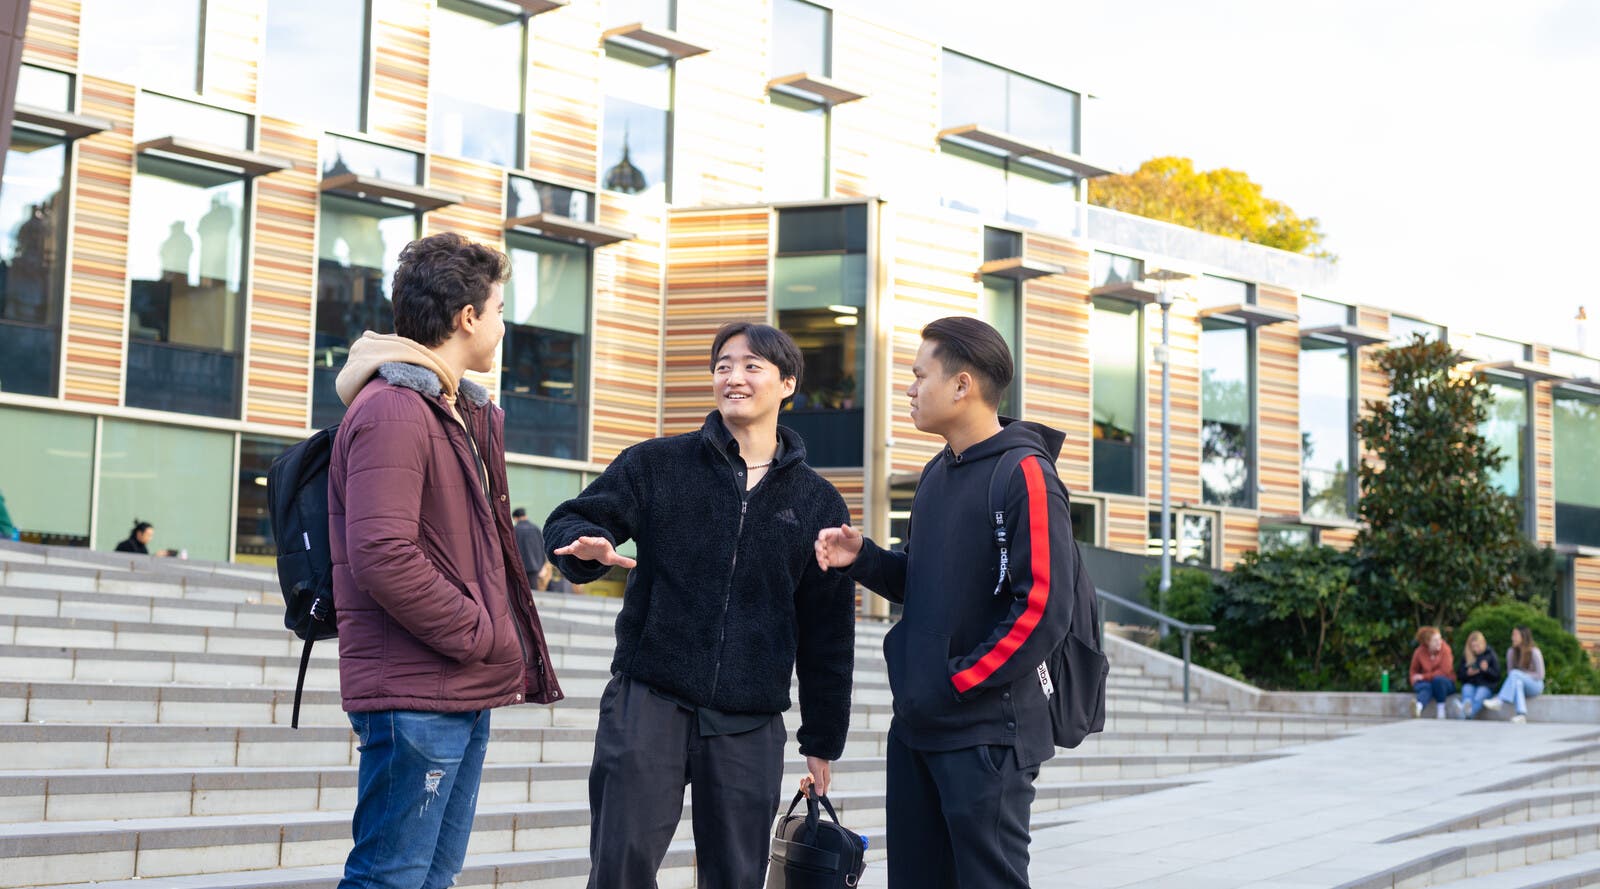 ISC students on campus